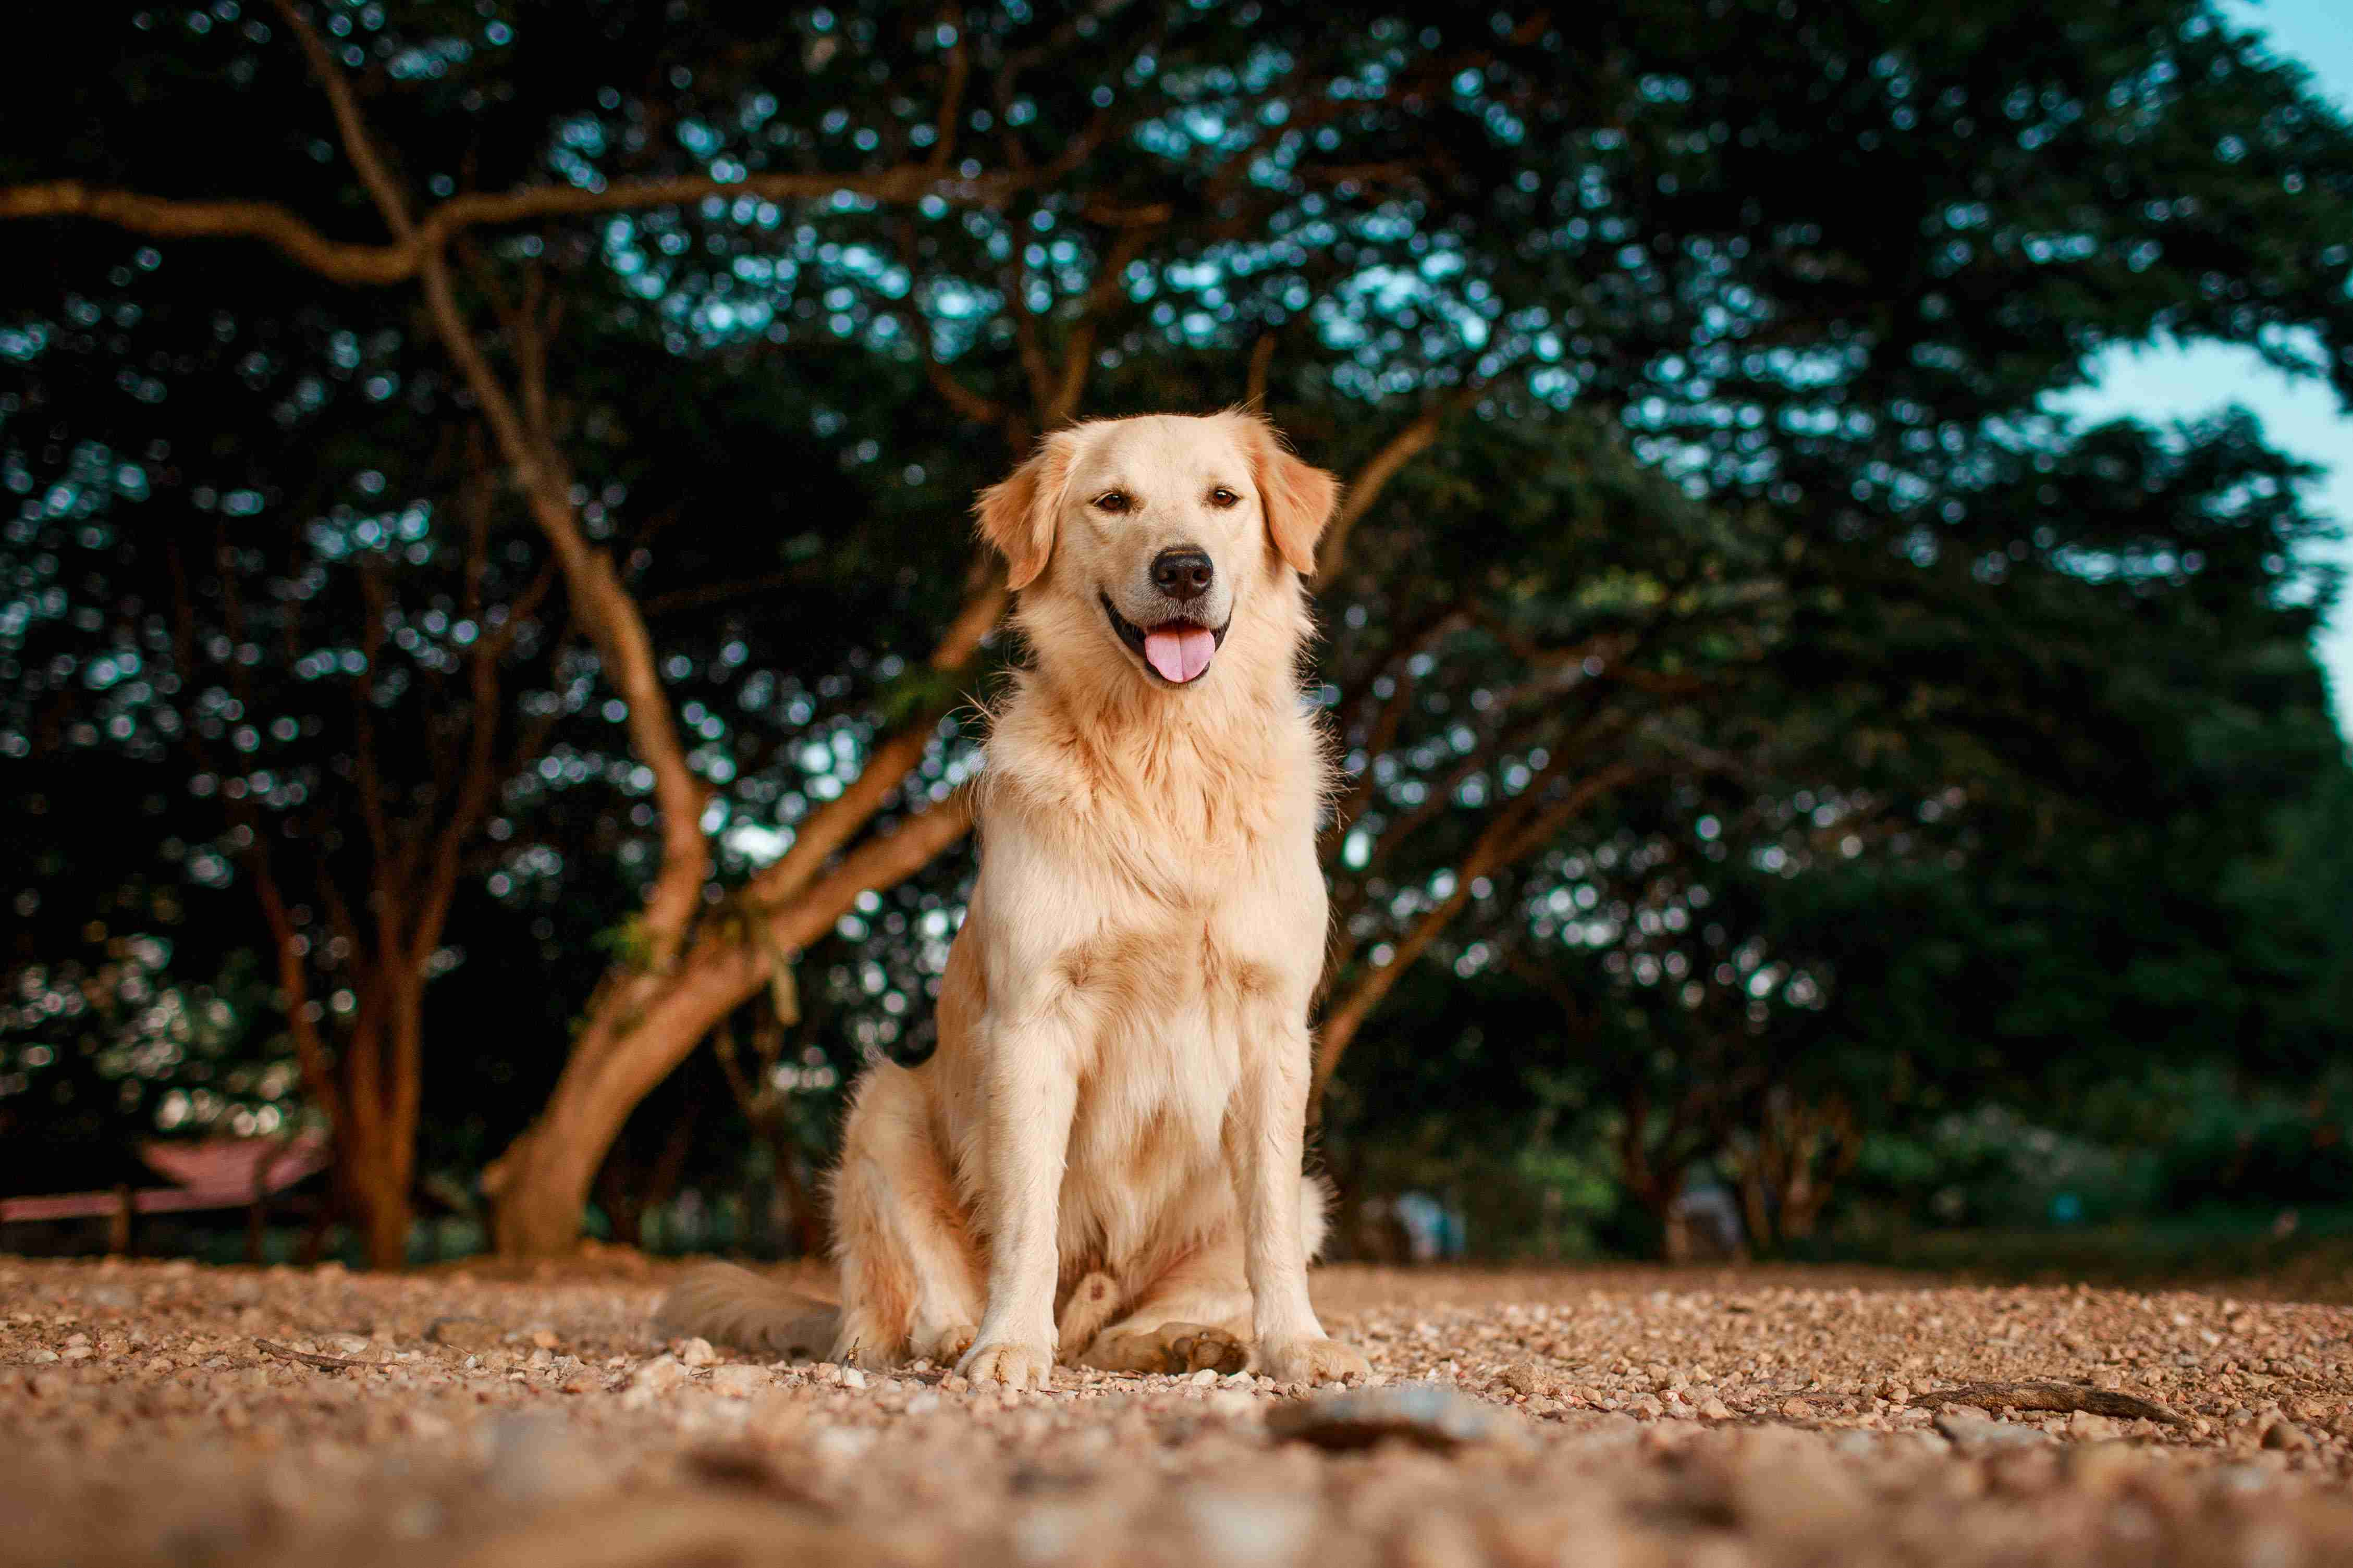 How can I prevent obesity in my Golden Retriever?